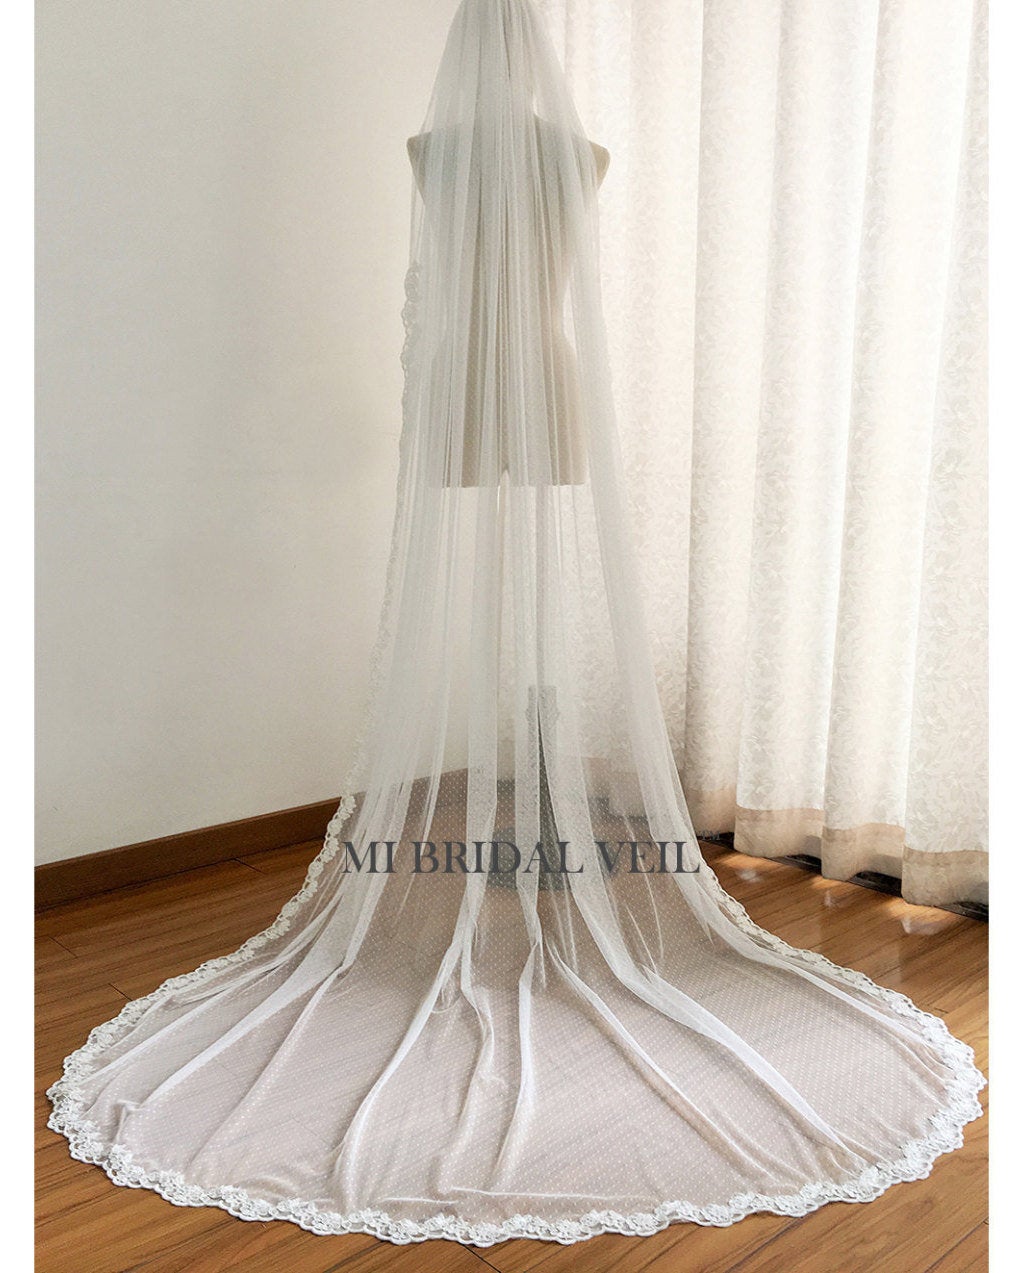 Polka Dotted Tulle Wedding Veil, Chapel Lace Bridal Veil, Lace at Elbow, Mi Bridal